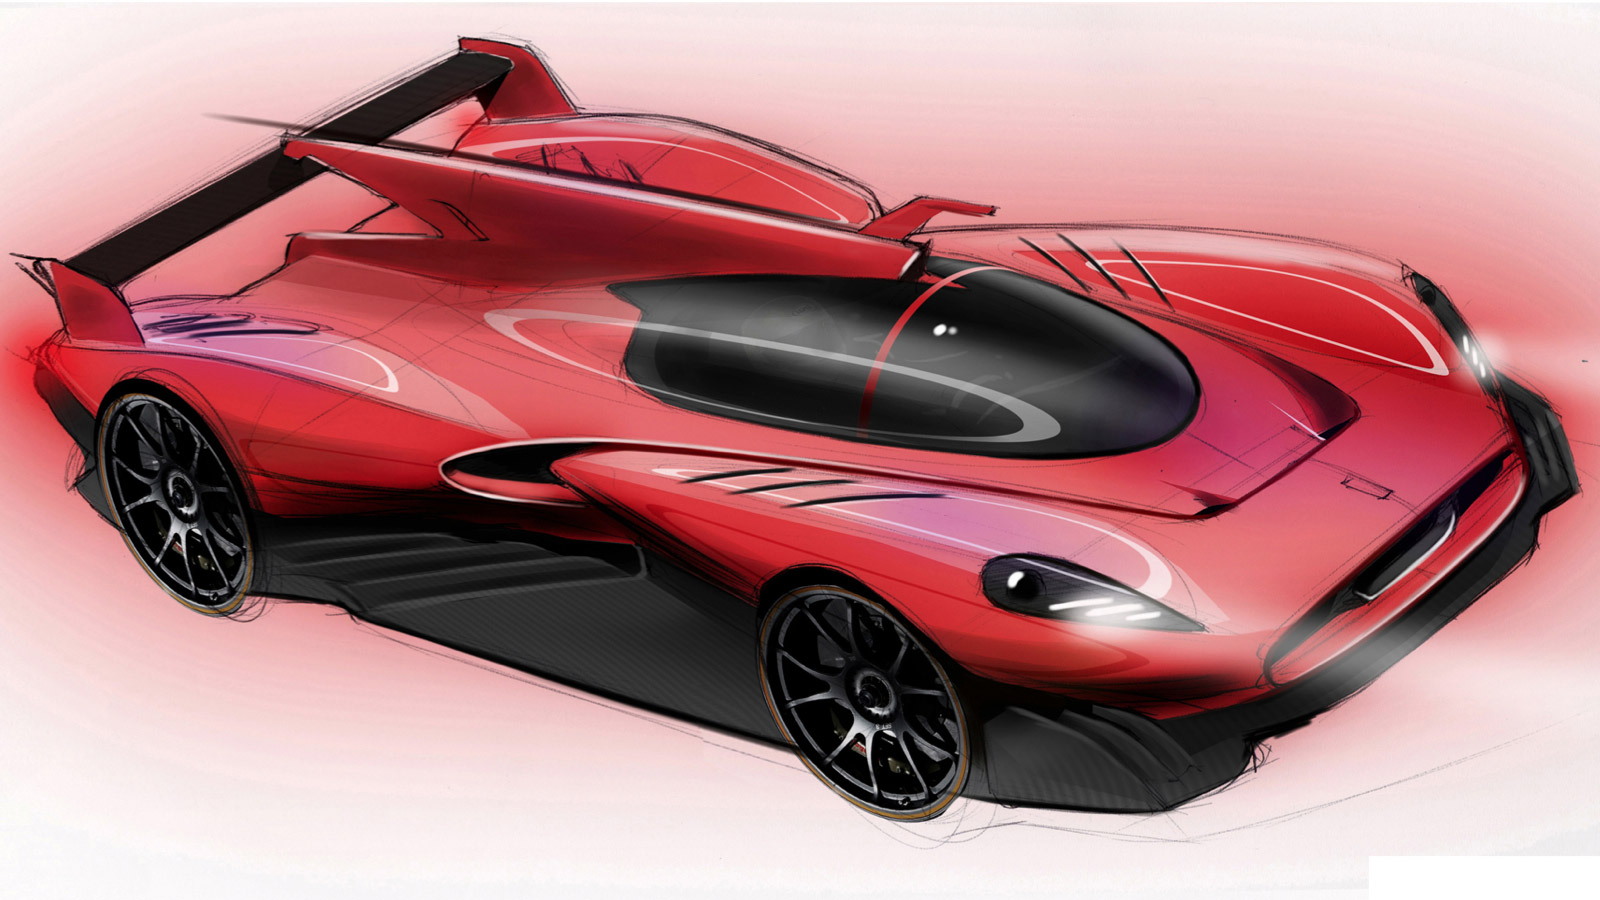 Official sketches of proposed James Glickenhaus P4/5 Competizione LMP race car